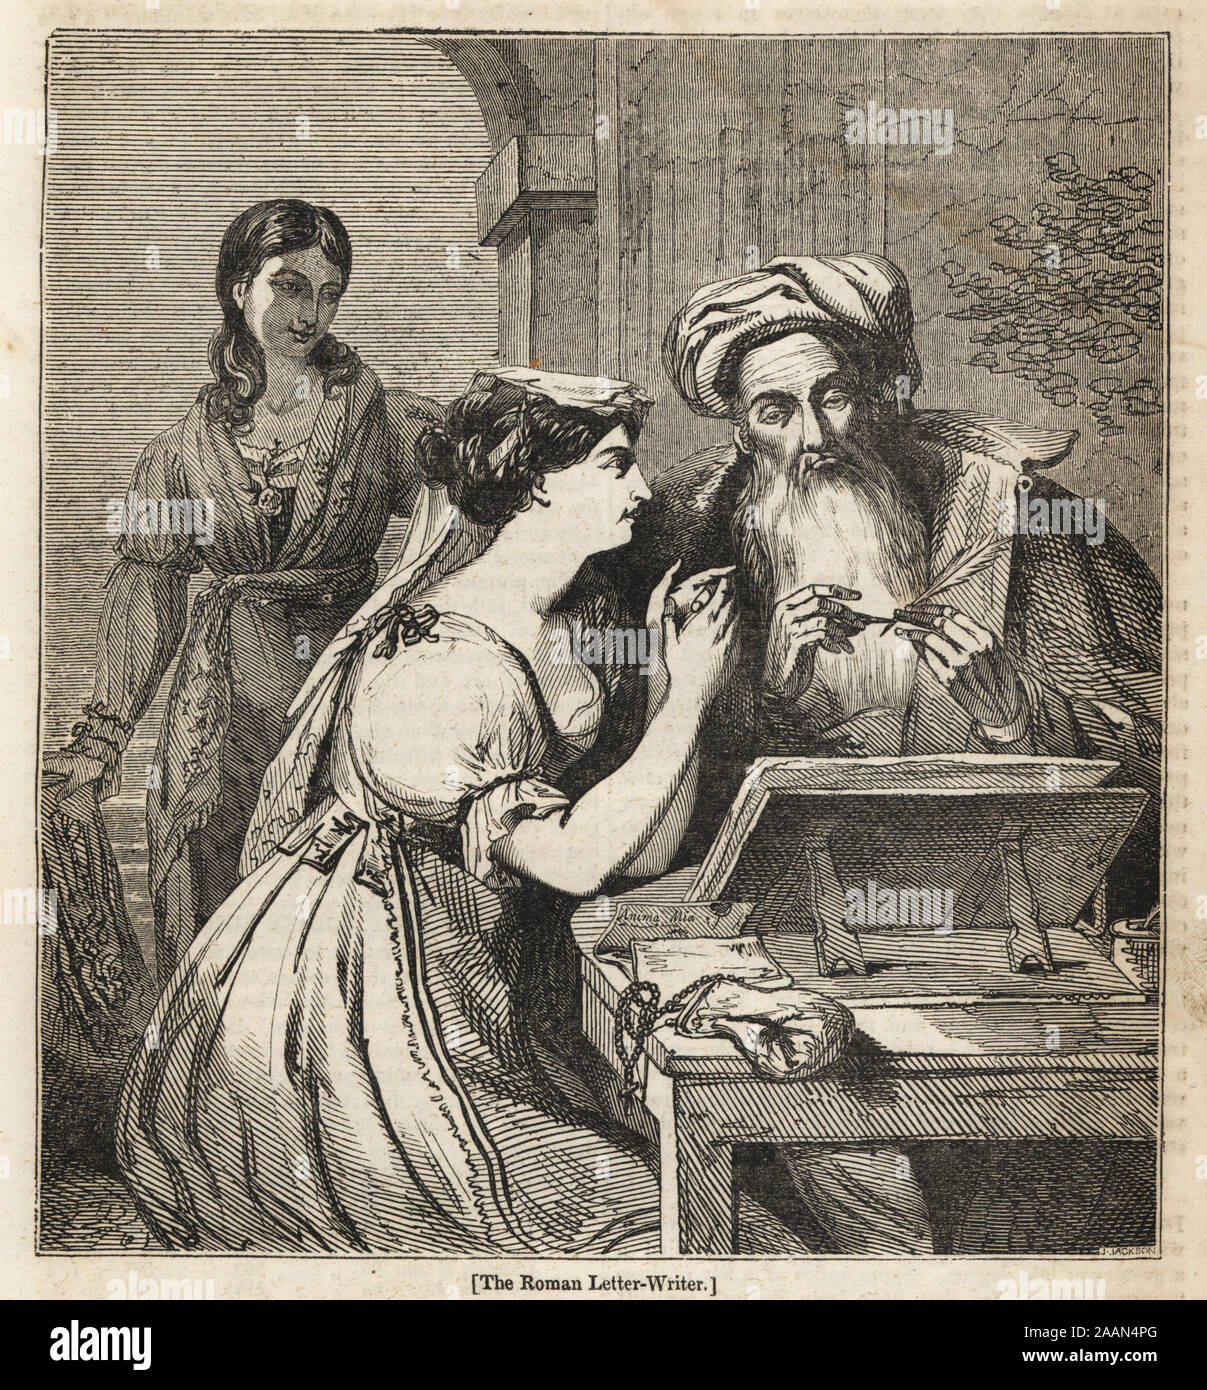 Woman dictating a letter to a scribe in Rome, 1833. The Roman letter-writer. Woodblock engraving by J. Jackson from The Penny Magazine, of the Society for the Diffusion of Useful Knowledge, printed by William Clowes, Lambeth, 1833. Stock Photo